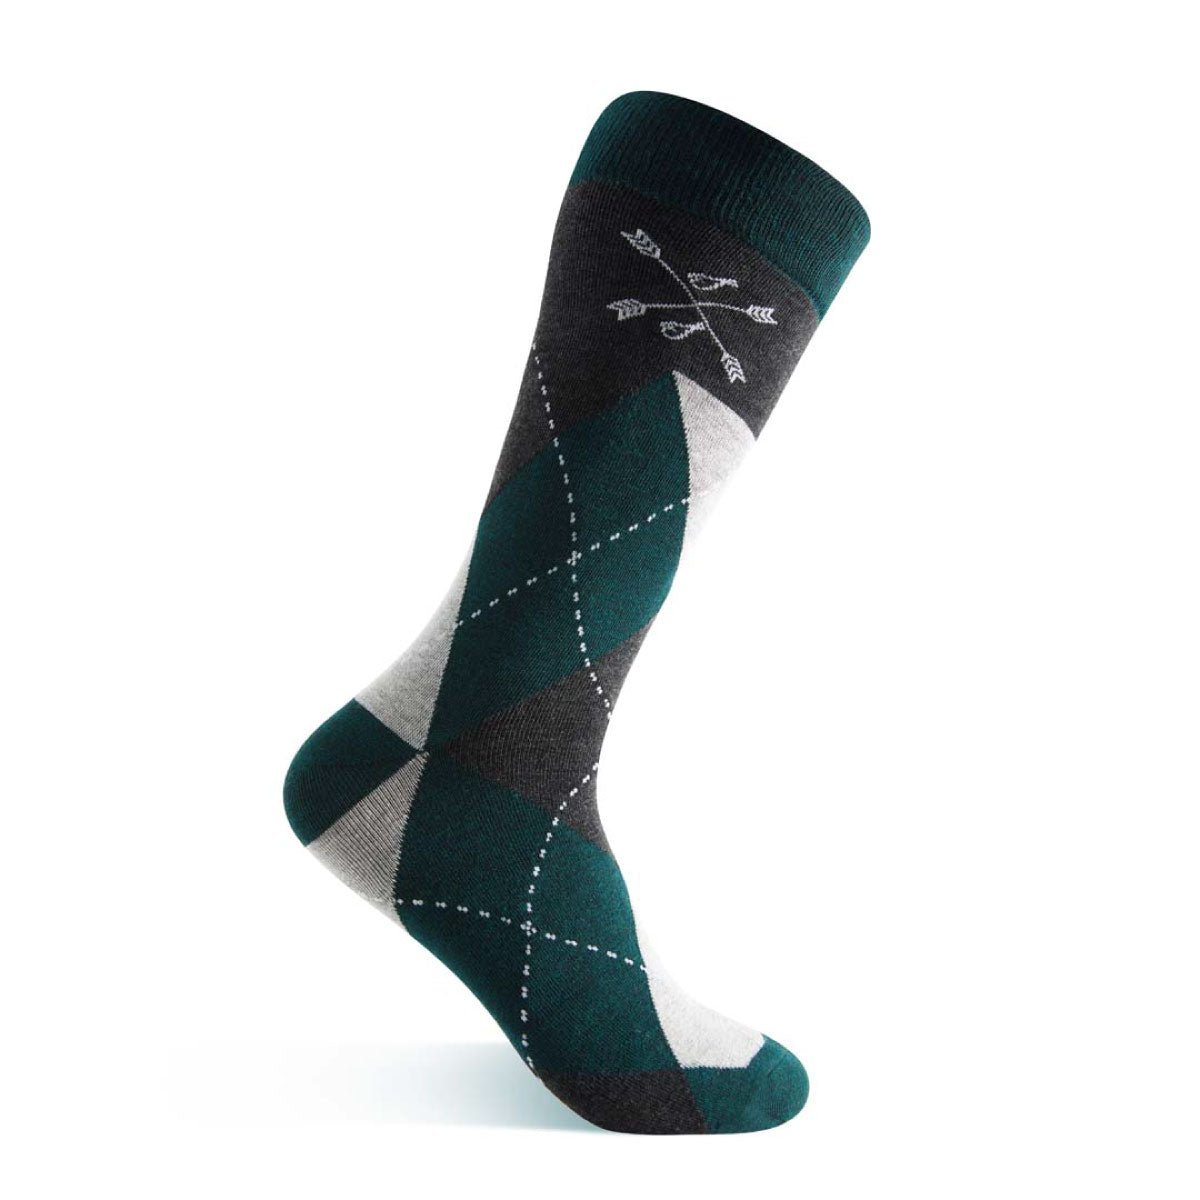 Green, charcoal, grey, and white argyle men's dress sock.